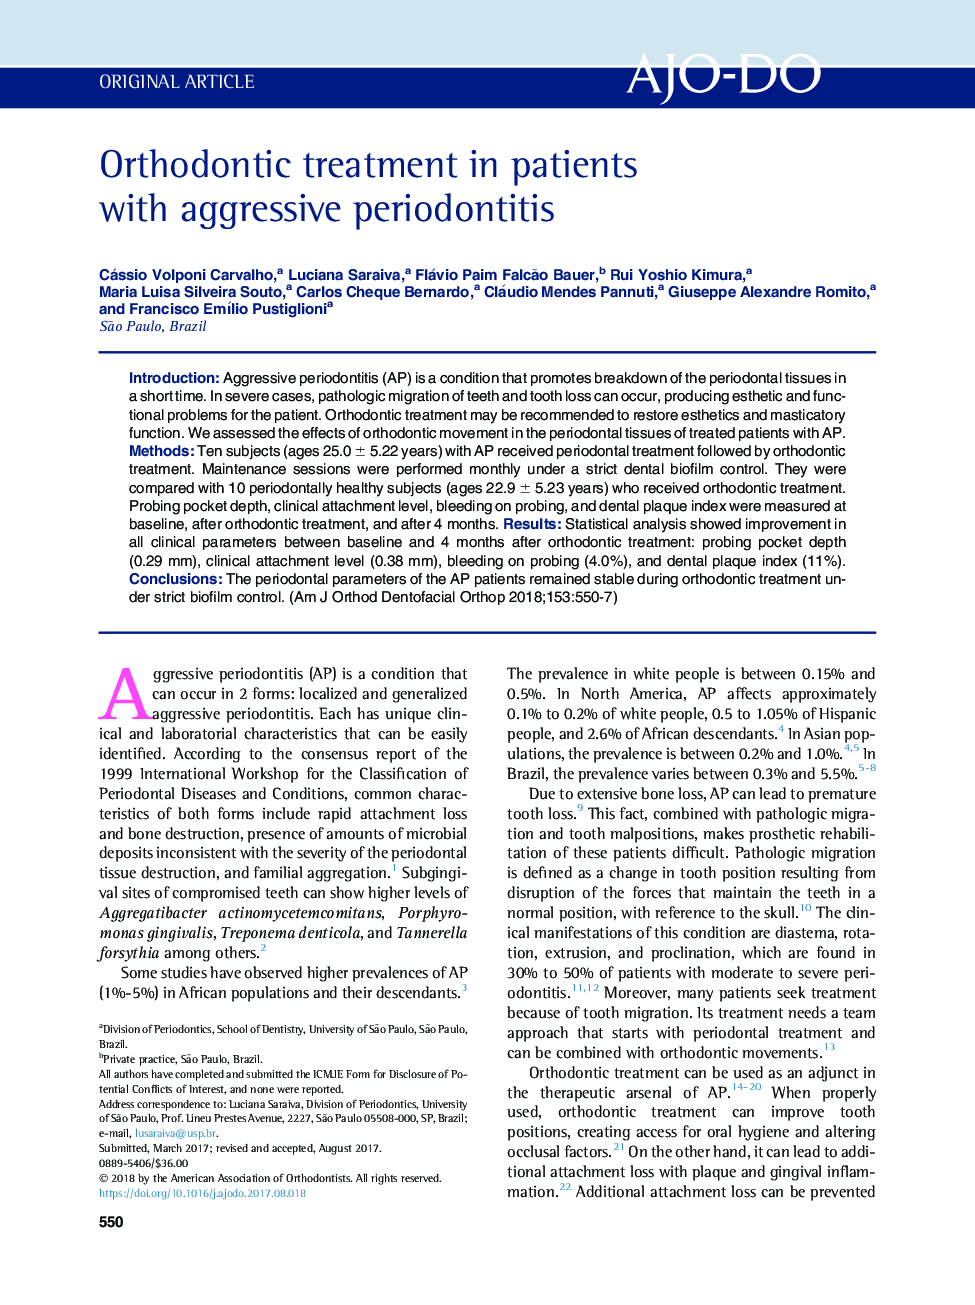 Orthodontic treatment in patients with aggressive periodontitis